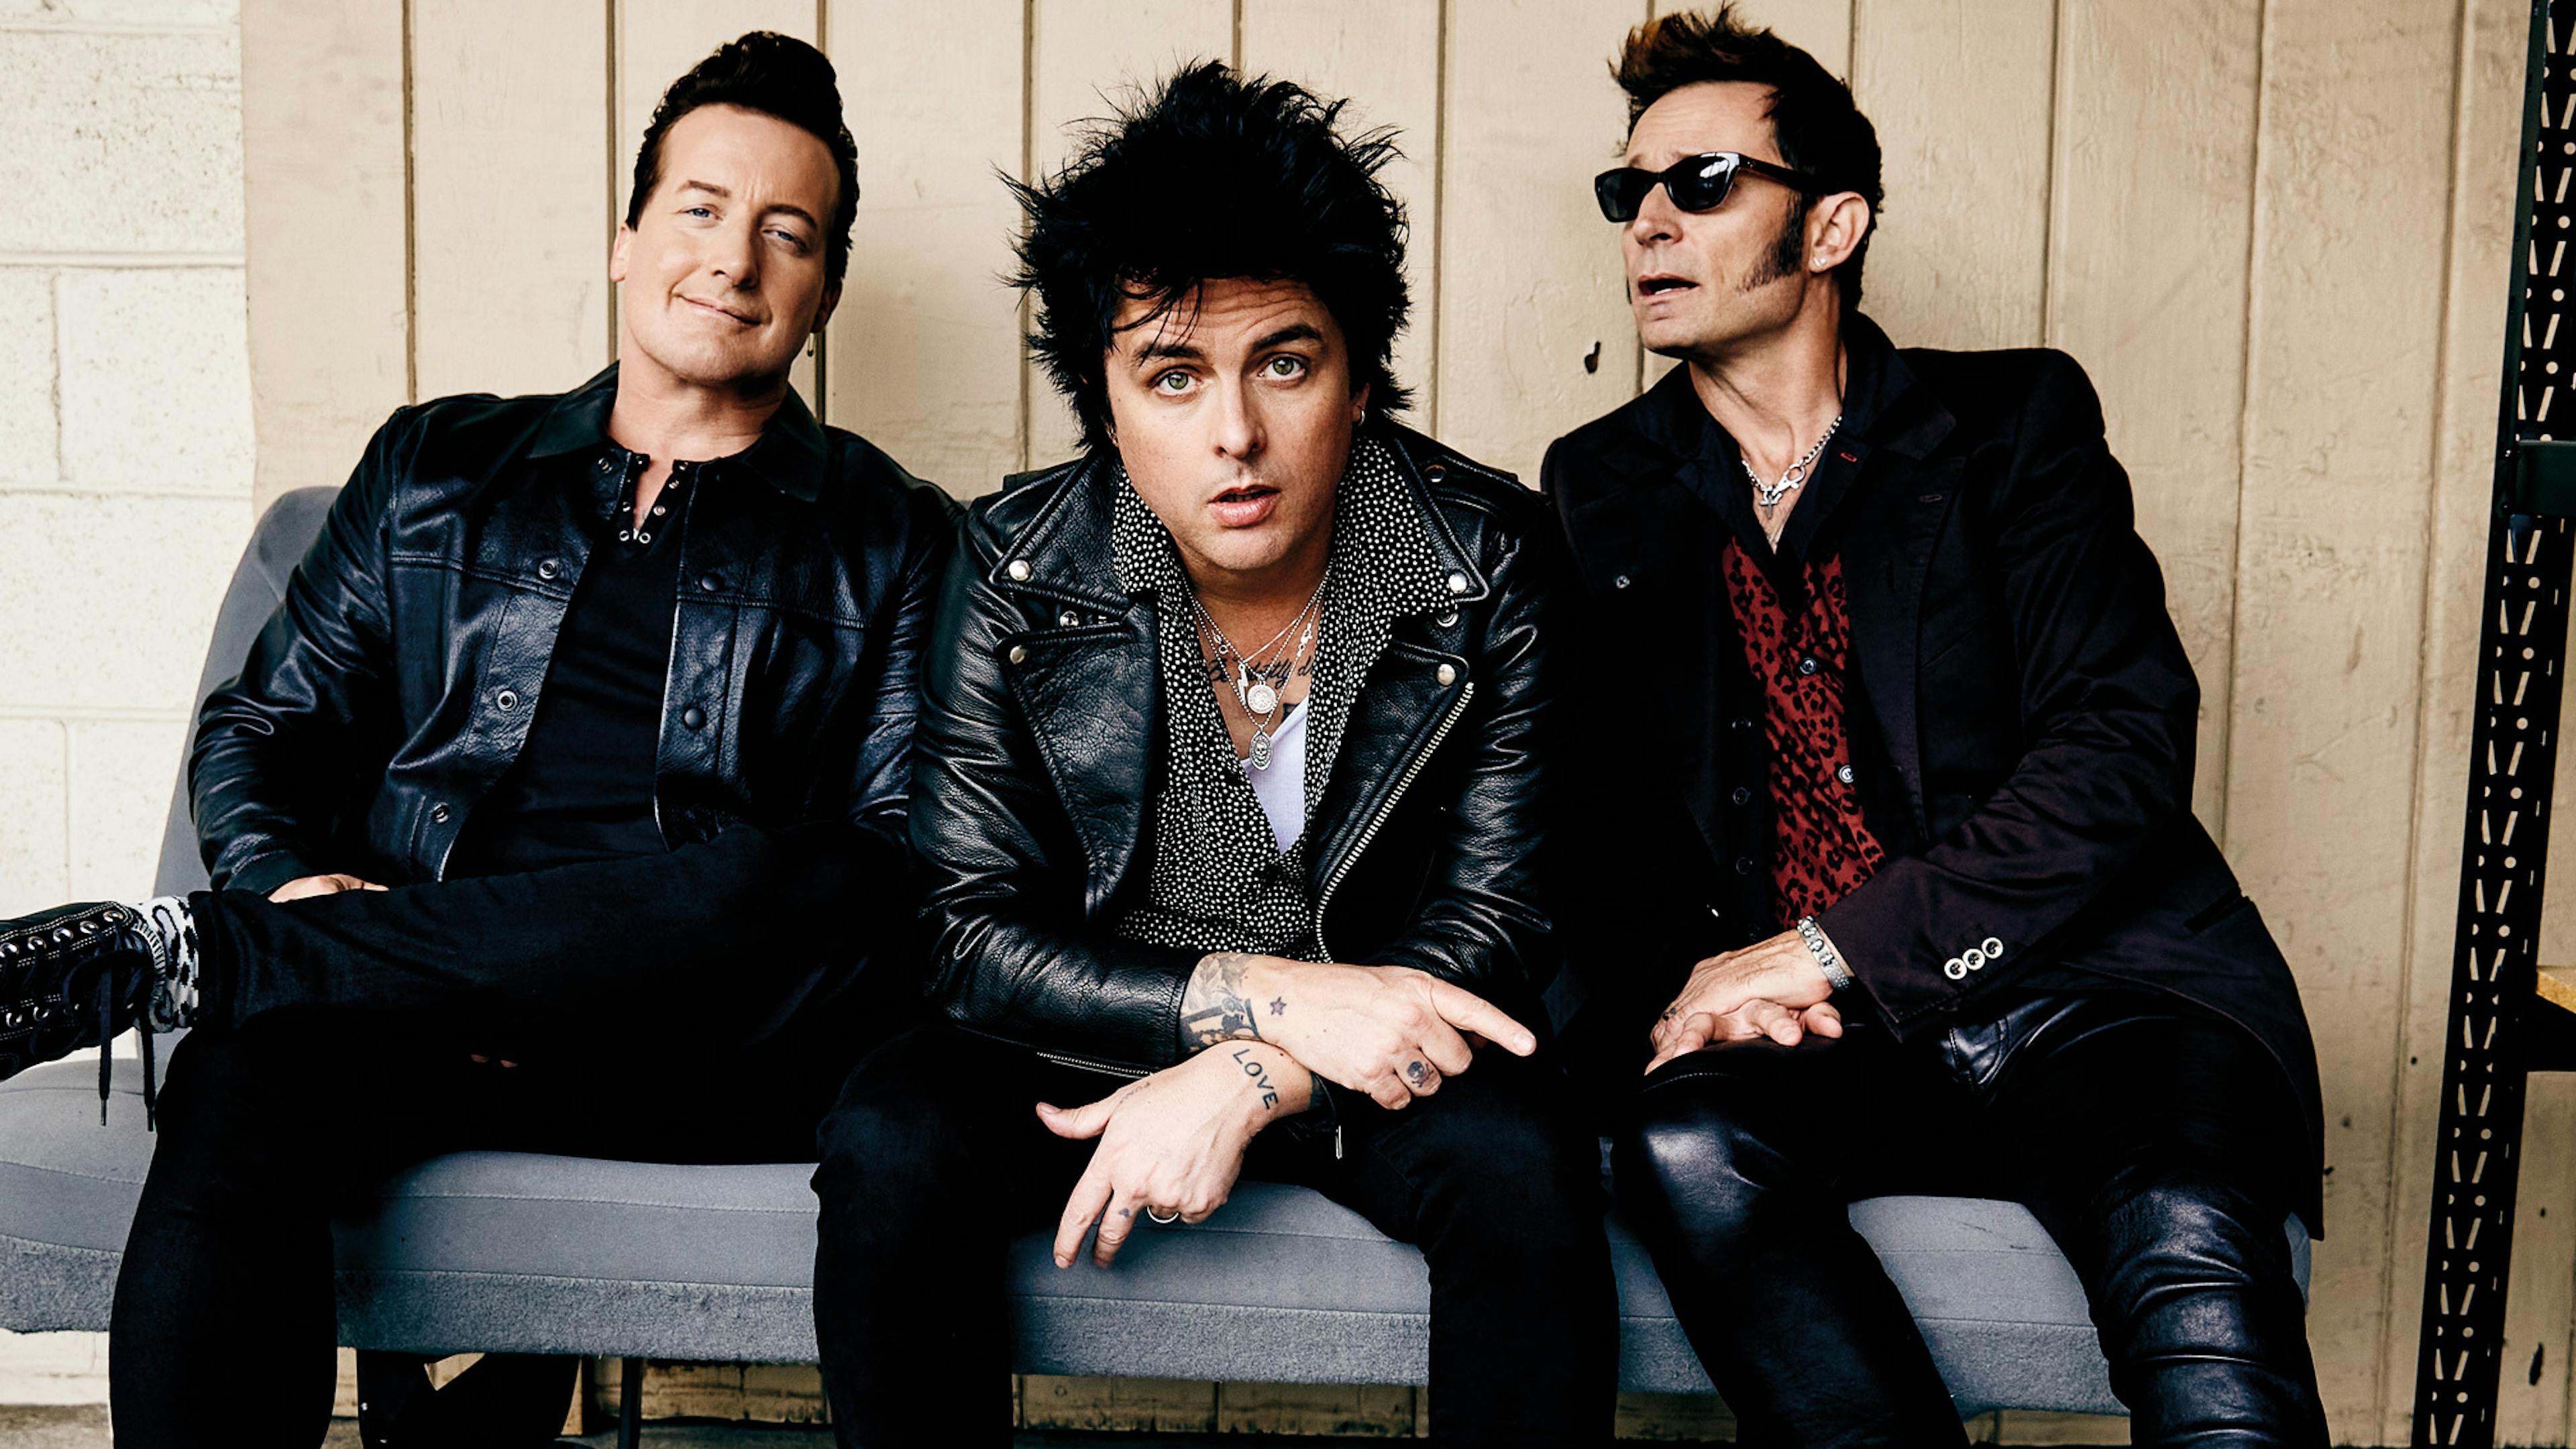 Here’s the incredible, career-spanning setlist from Green Day’s first show of 2022